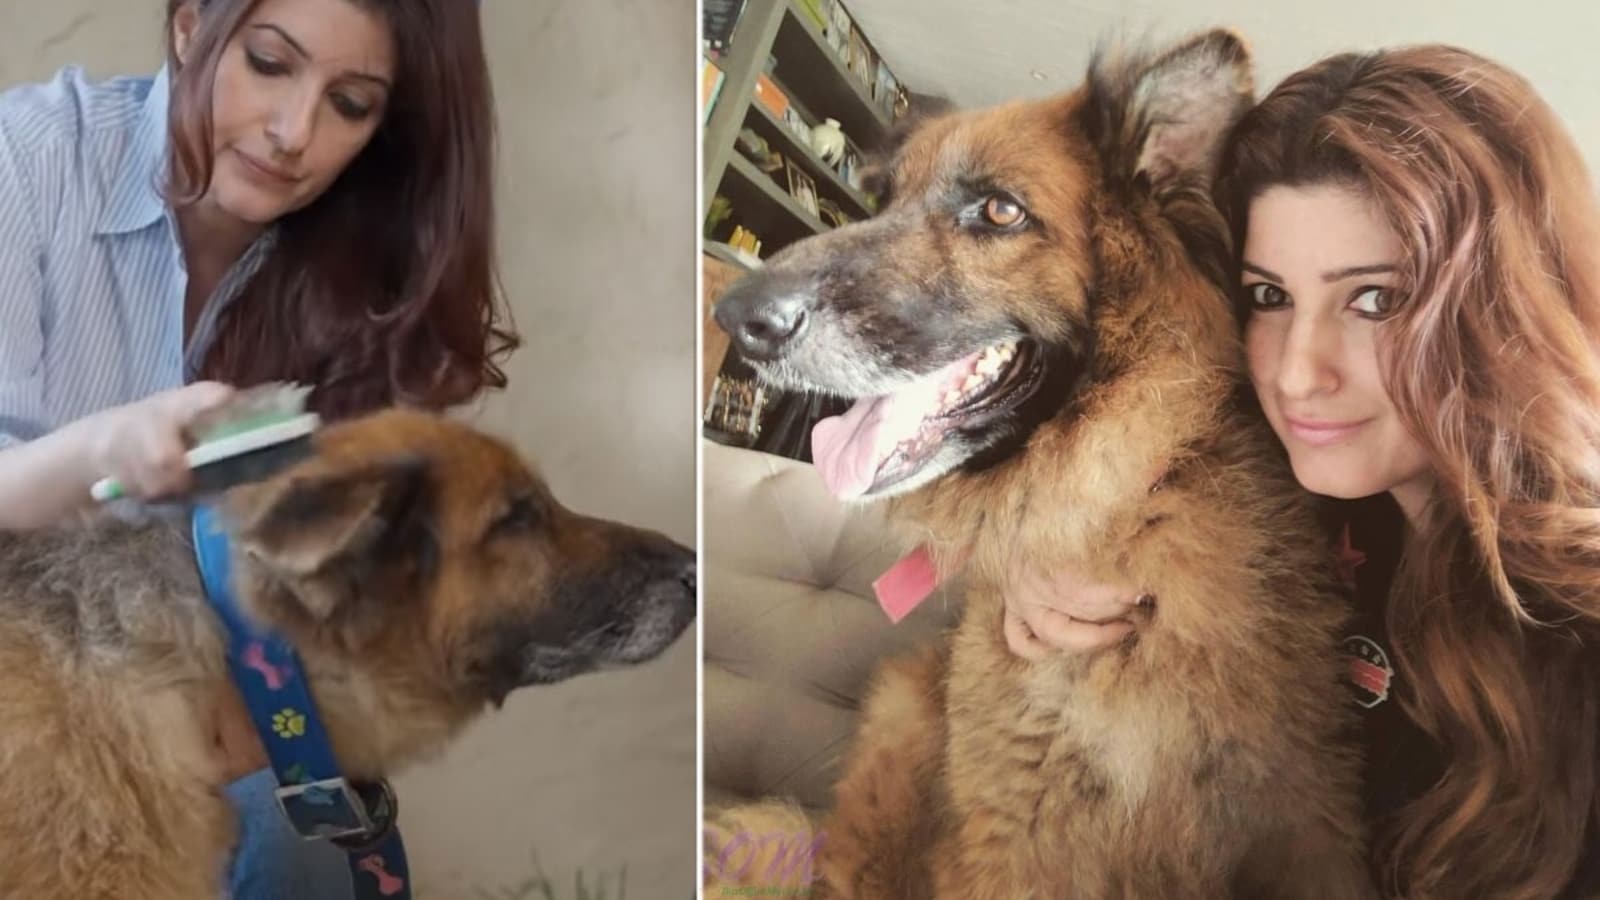 Twinkle Khanna loses pet dog Cleo, says her heart feels ‘heavy and empty’ at same time